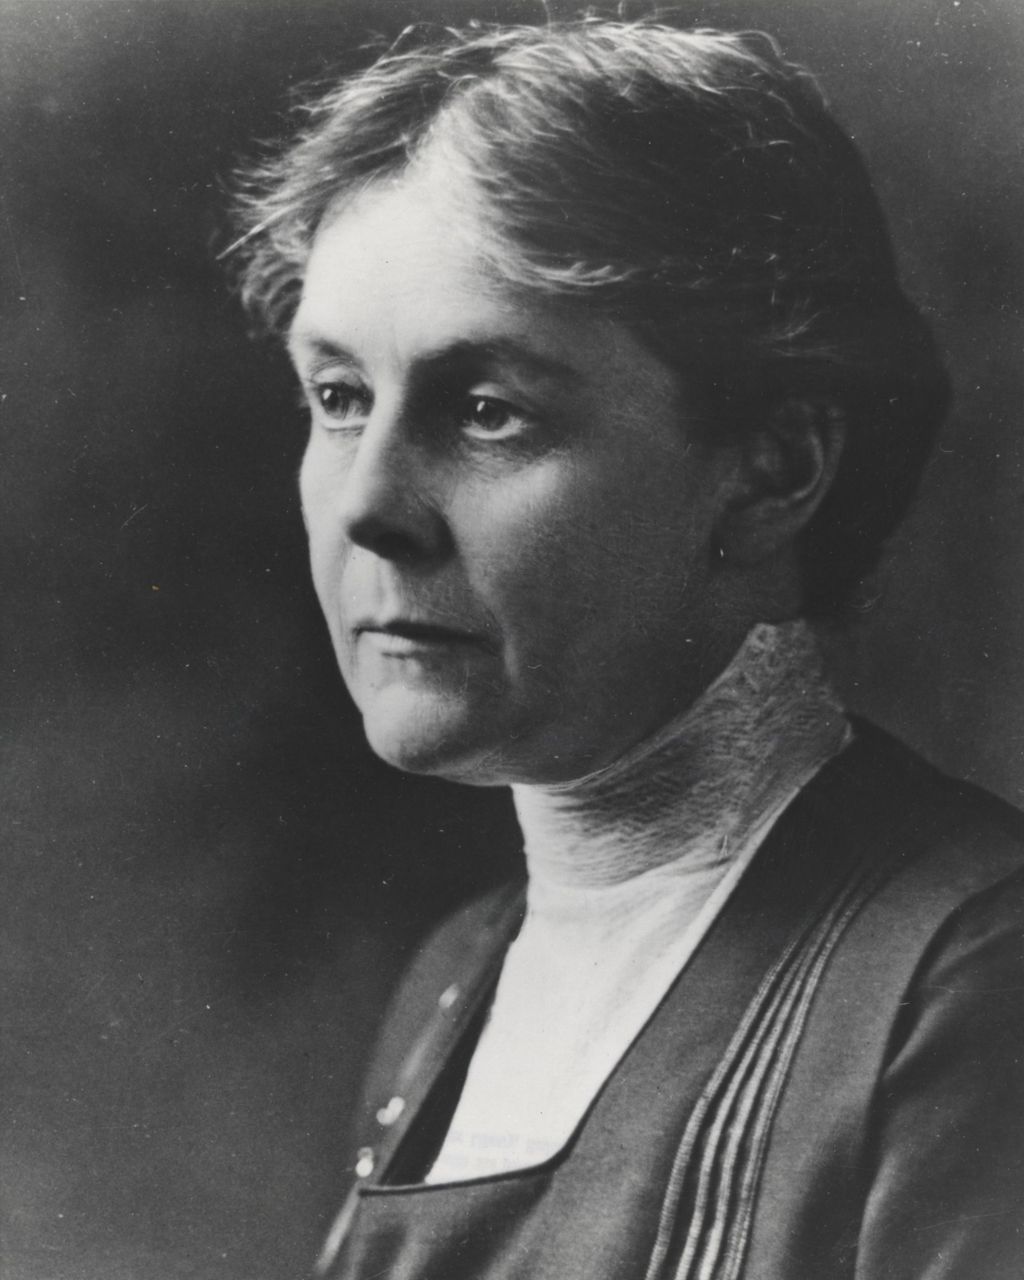 Miniature of Dr. Alice Hamilton, physician and Hull-House resident